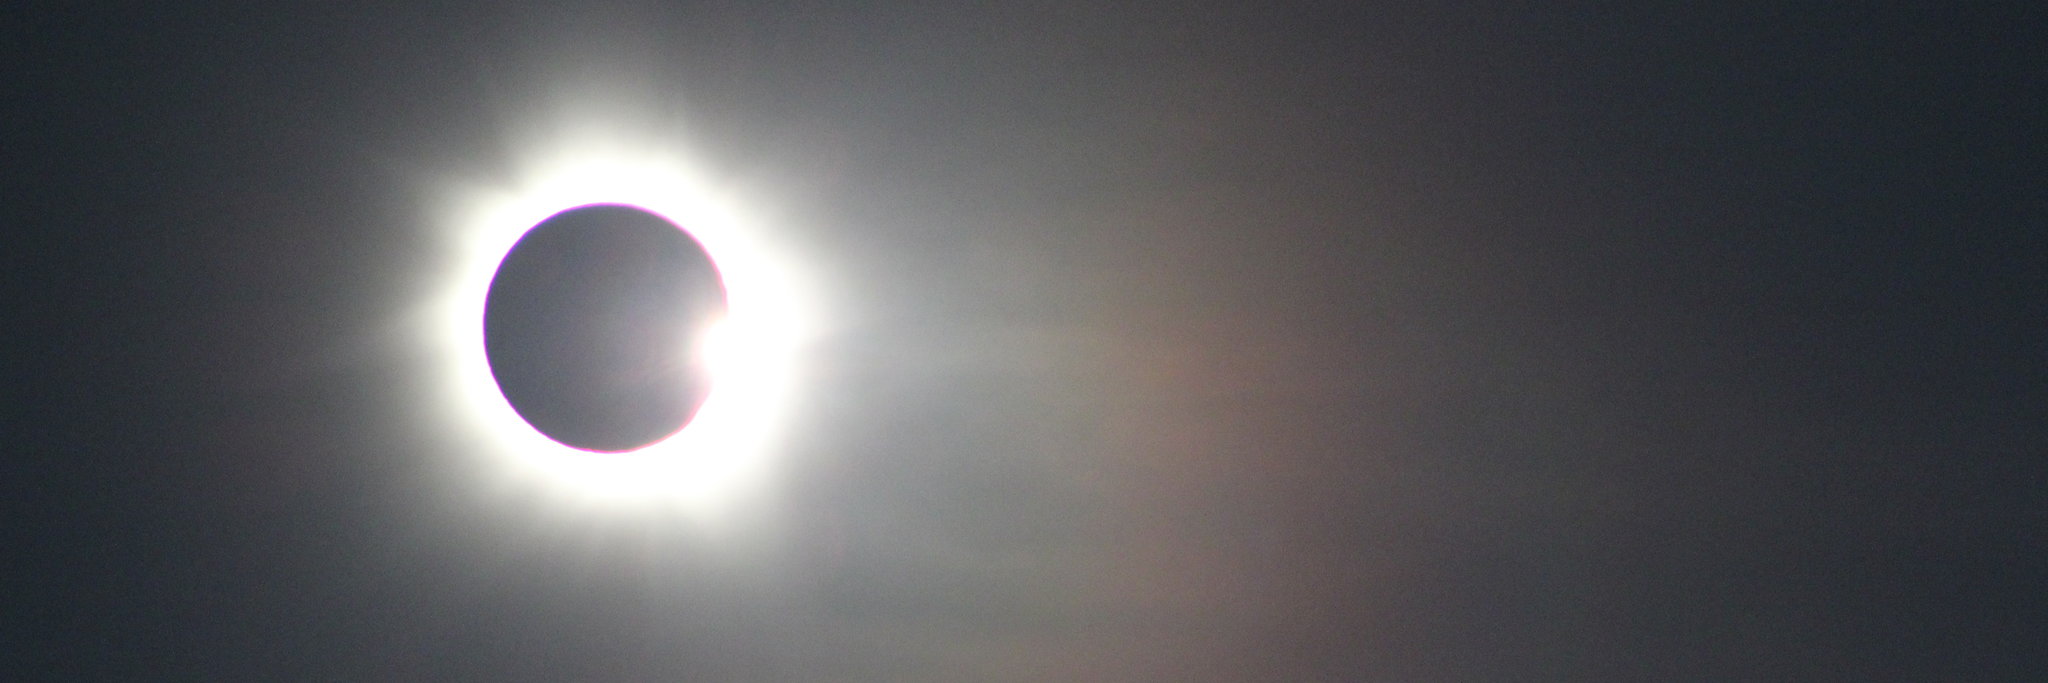 Panorama of an eclipse representing variable shadowing